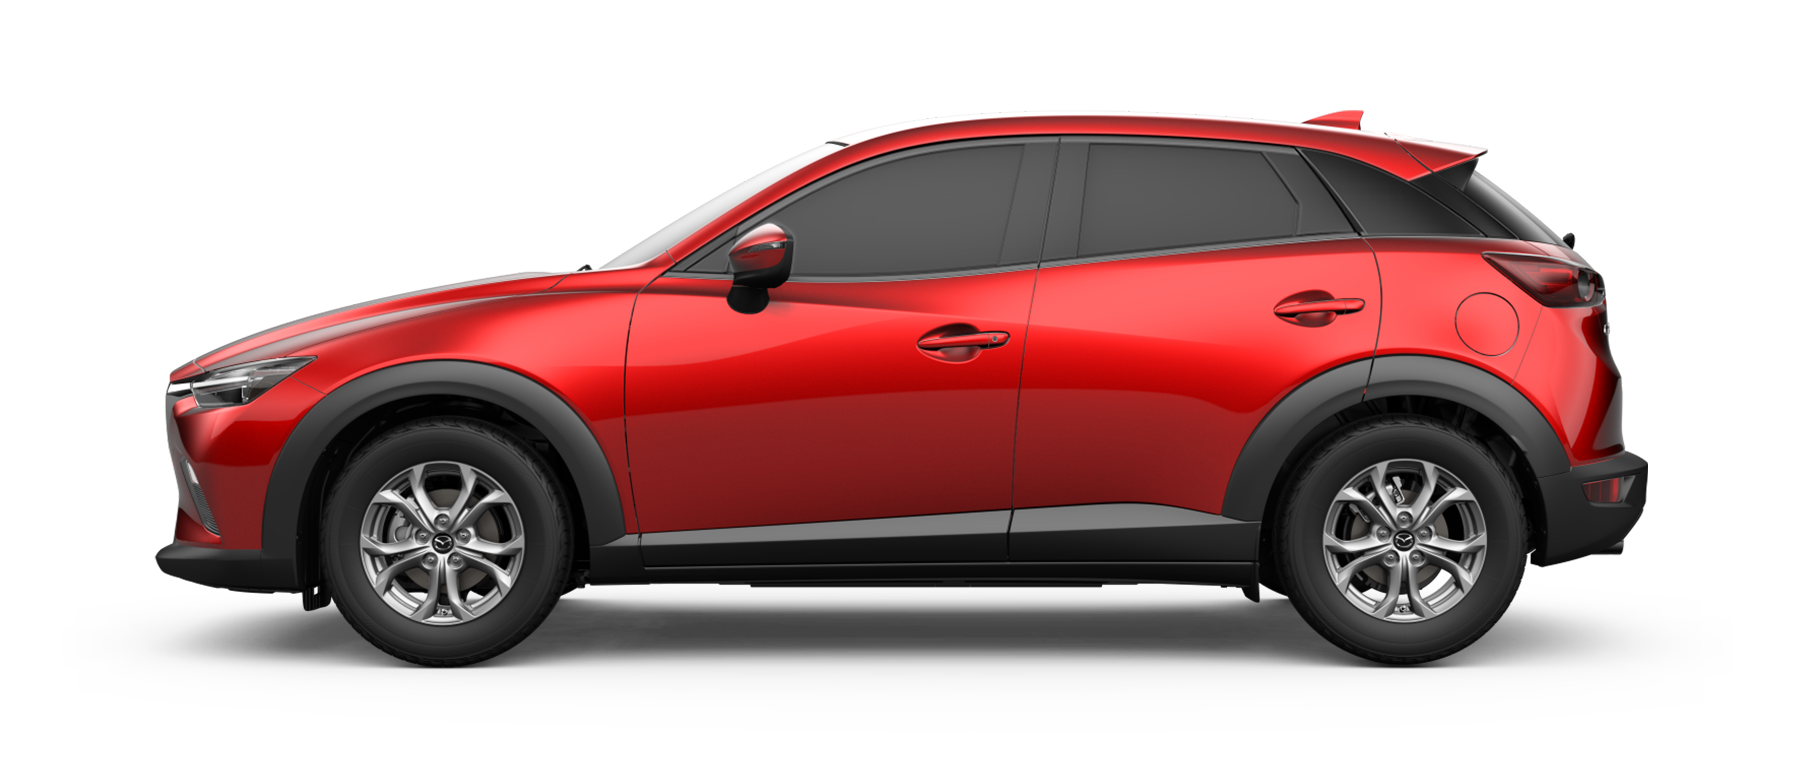 Mazdaspeed 3 PNG Free Download